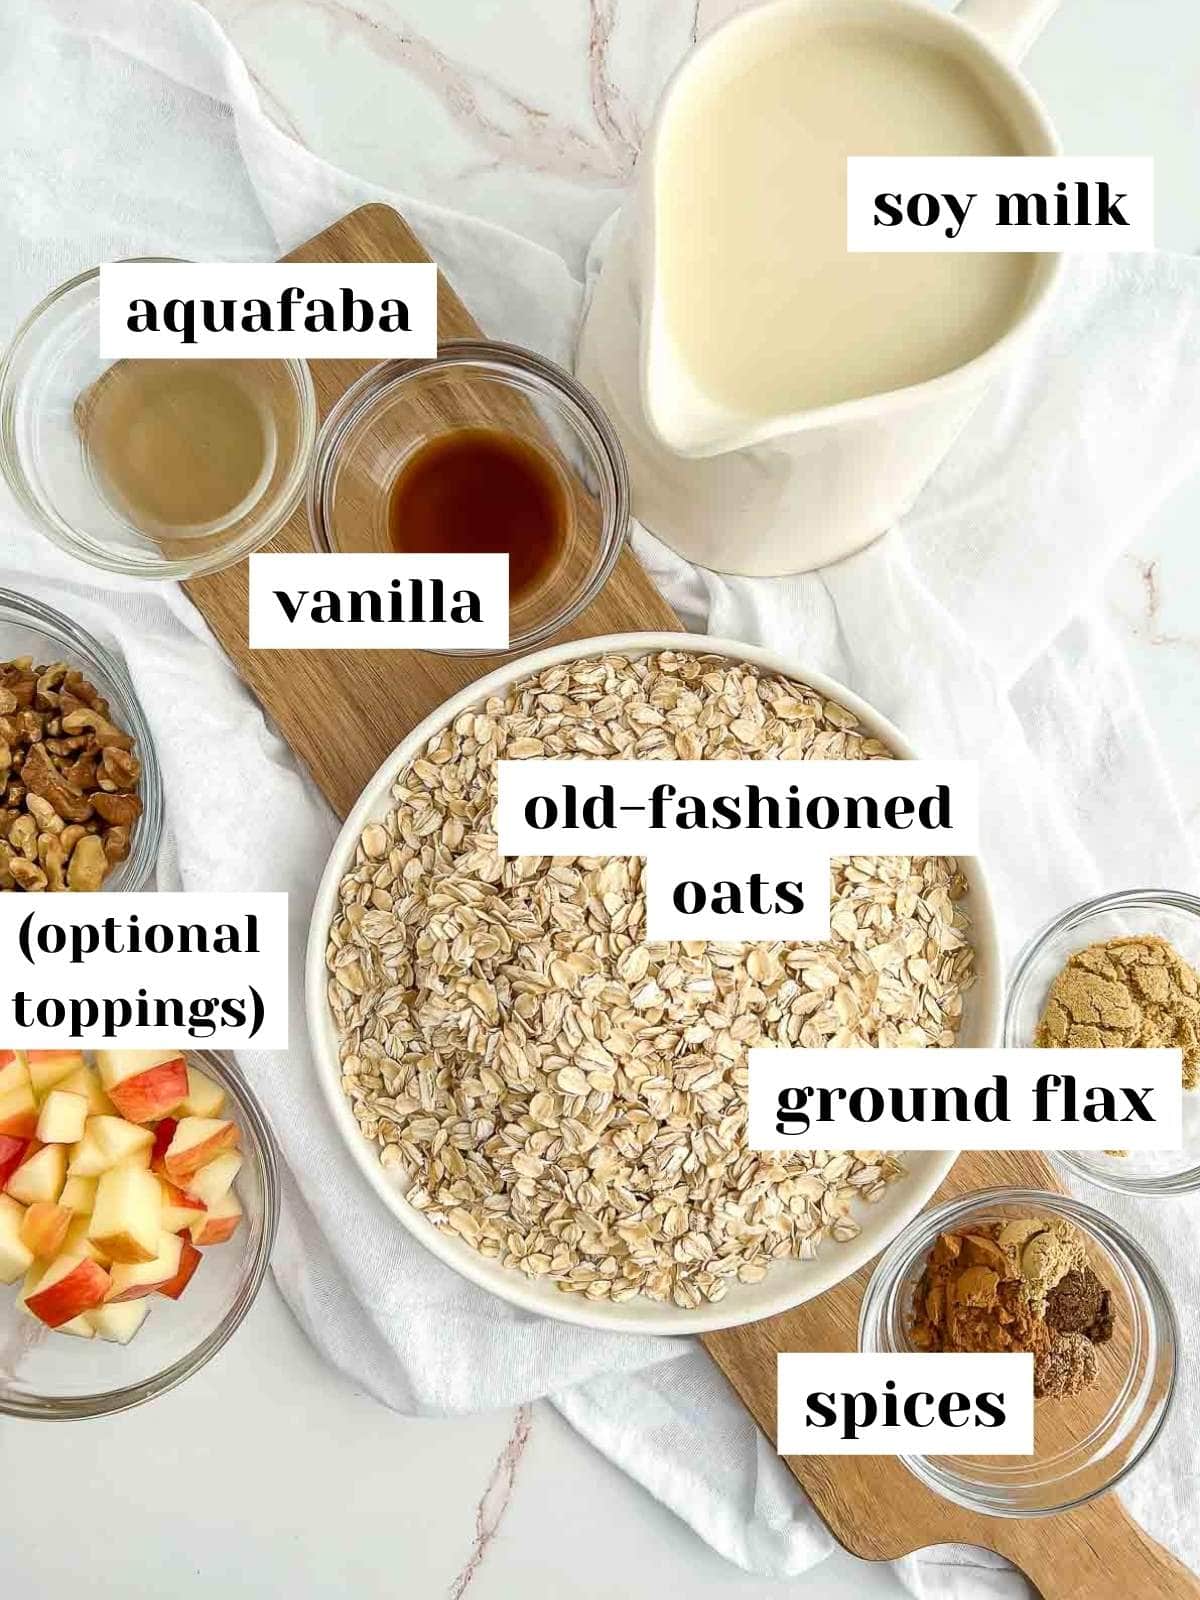 labeled ingredients including soy milk, oats, toppings, ground flaxseed, aquafaba, and spices on a white marble counter